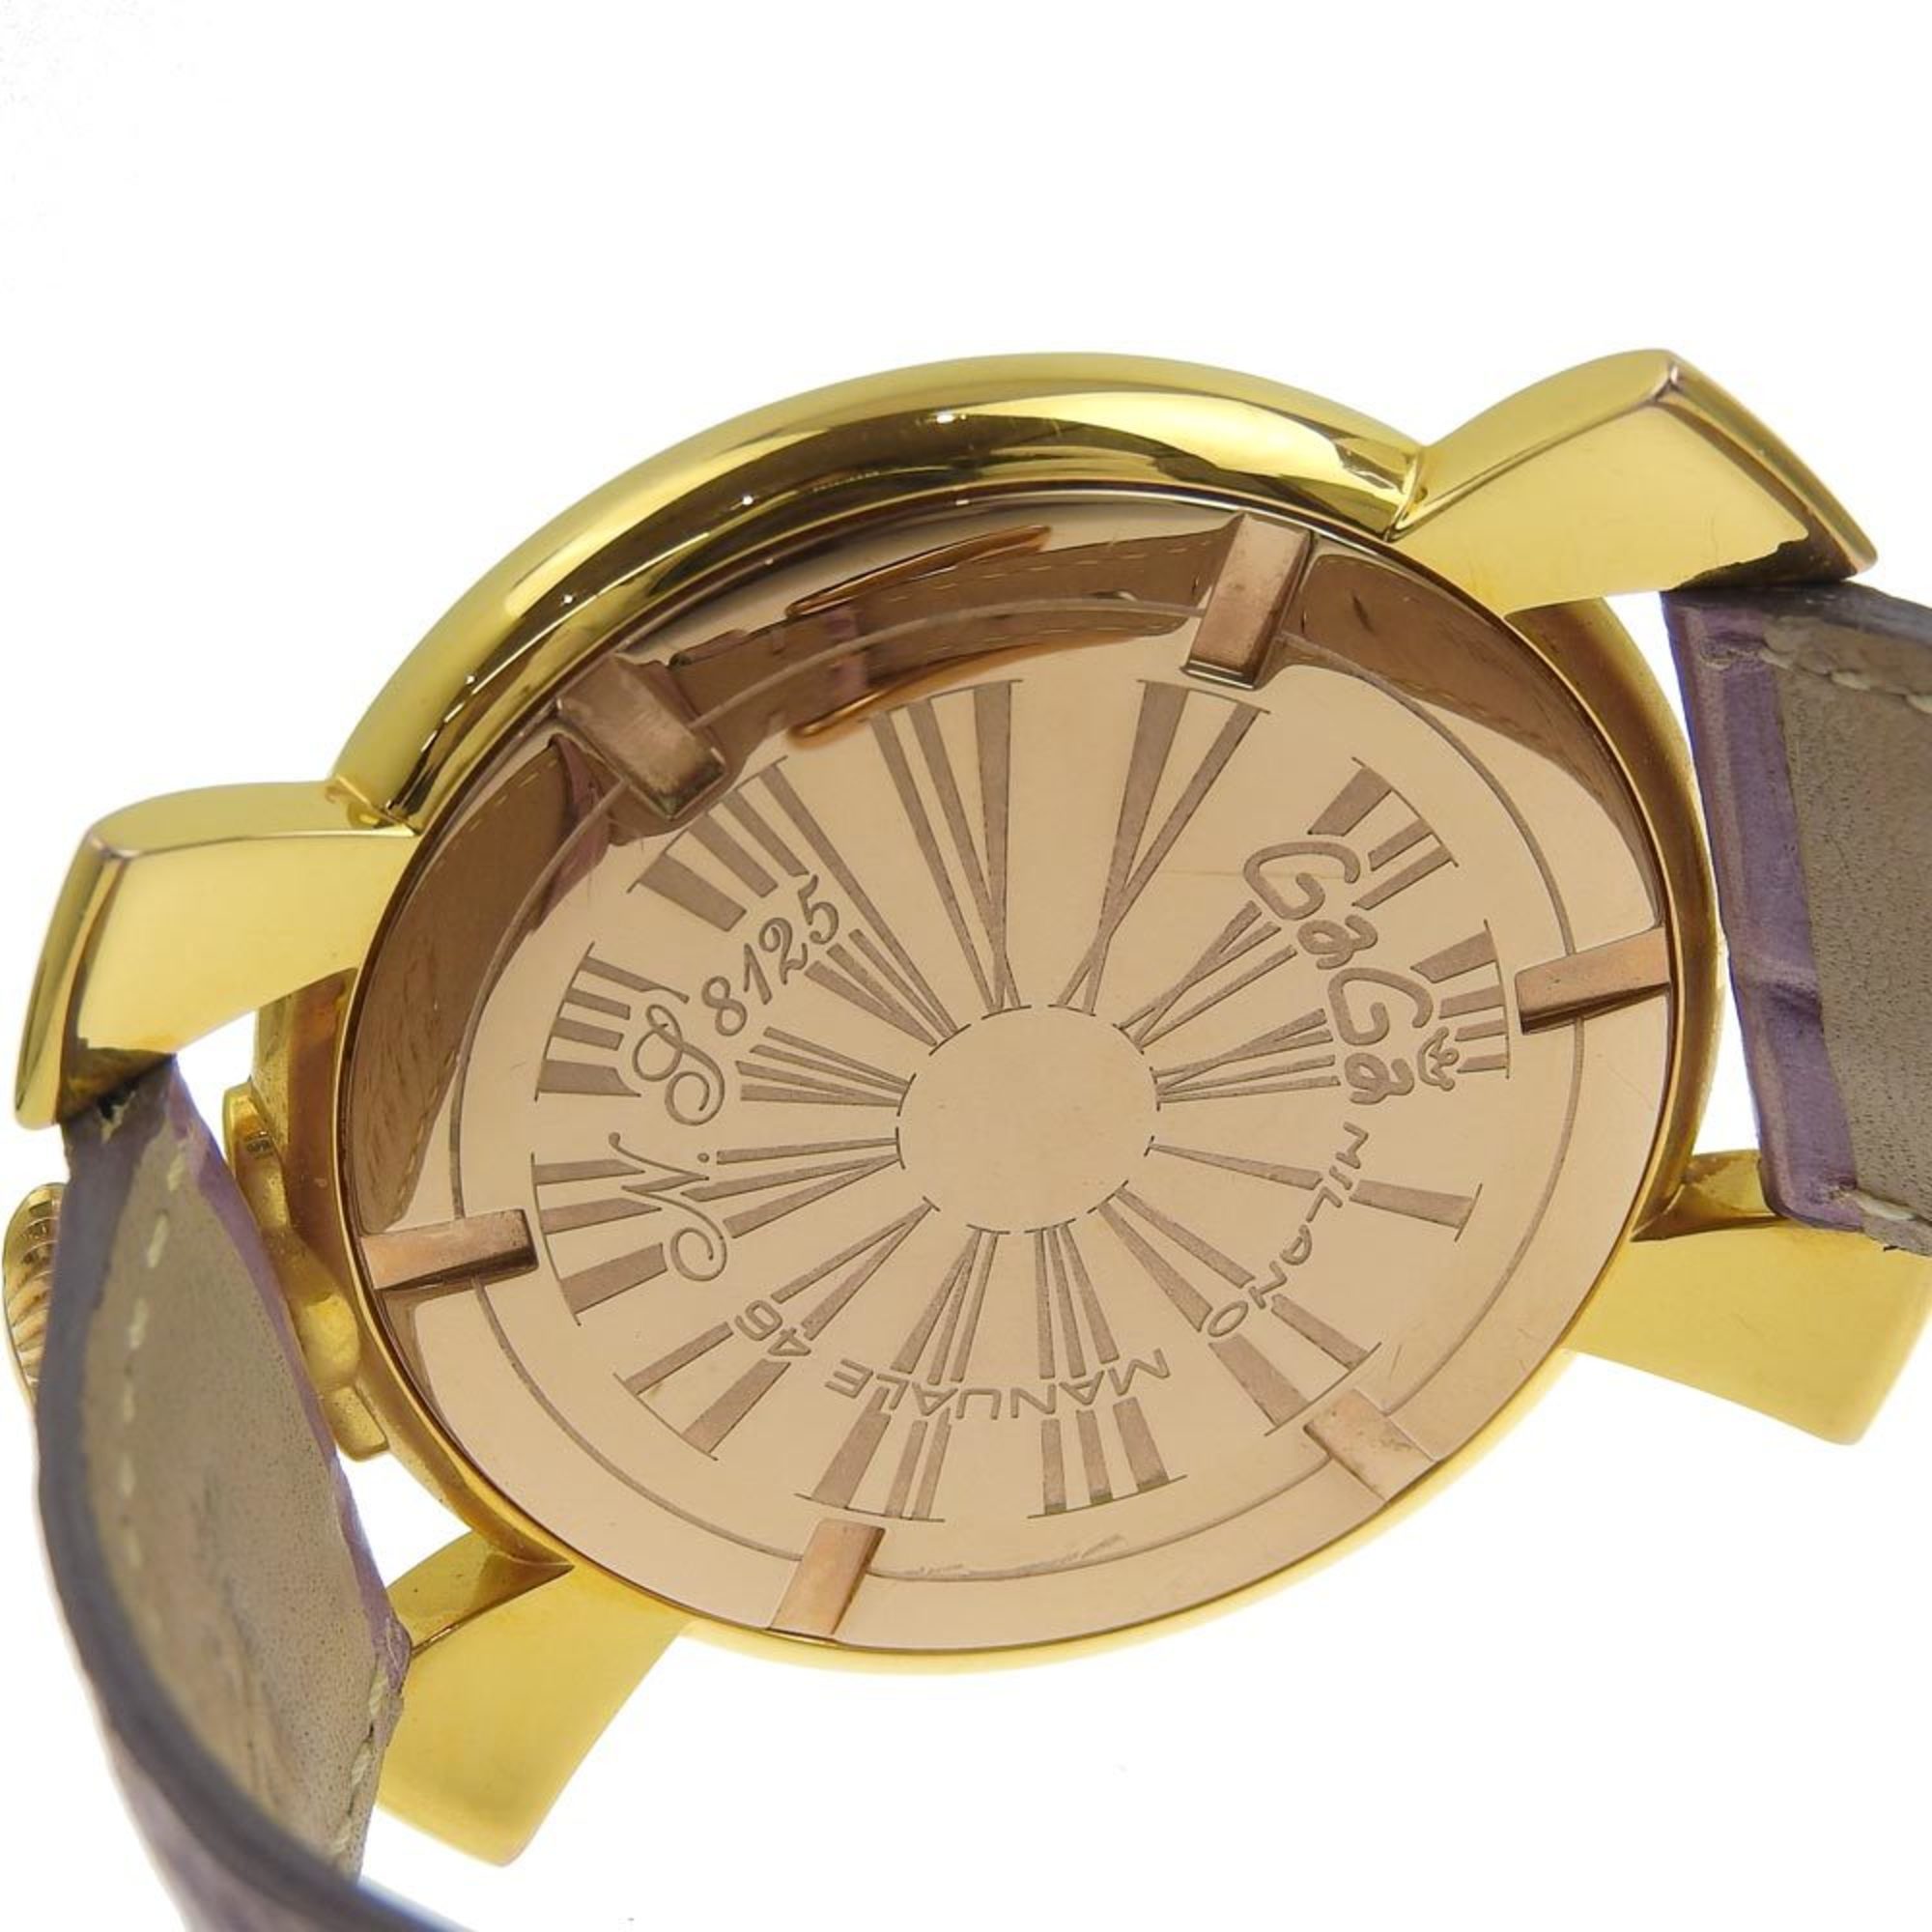 Gaga Milano Manuale Watch 46 Stainless Steel x Leather Purple Gold Quartz Small Second Dial Men's I140223037